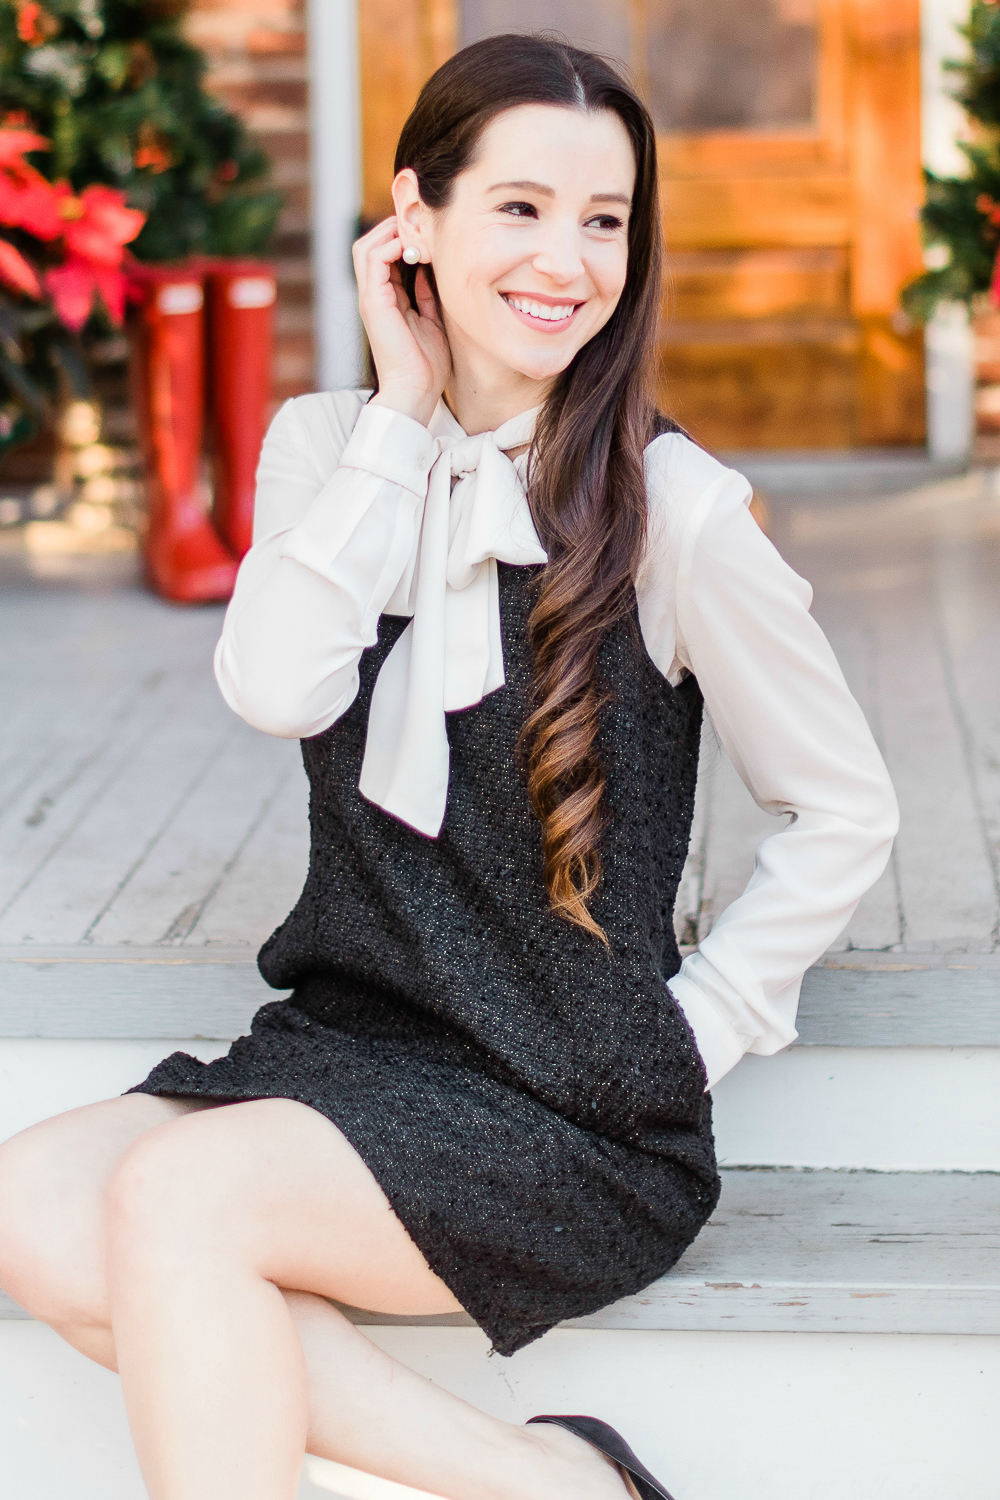 Trend to Try: The Shirt Under Dress Look by affordable fashion blogger Stephanie Ziajka from Diary of a Debutante, Lauren James Austen Dress, Lauren James Margo Top, preppy style blogger, preppy holiday outfits